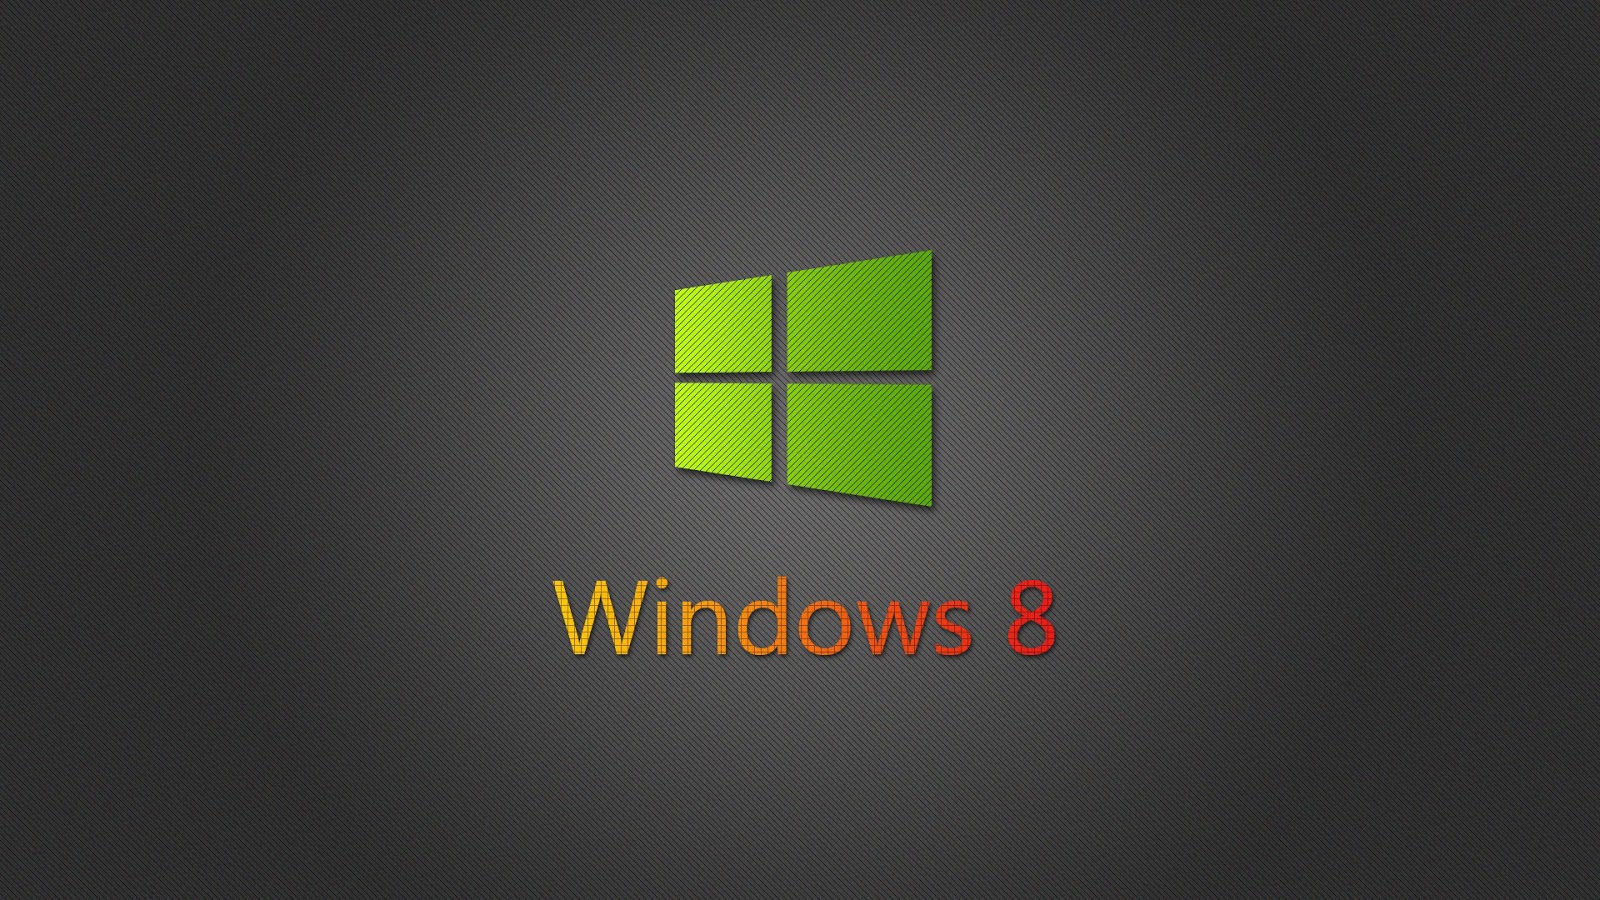 Windows 8 Full HD wallpapers 1080p Full Hd Wallpapers For Windows 8 1920x1080